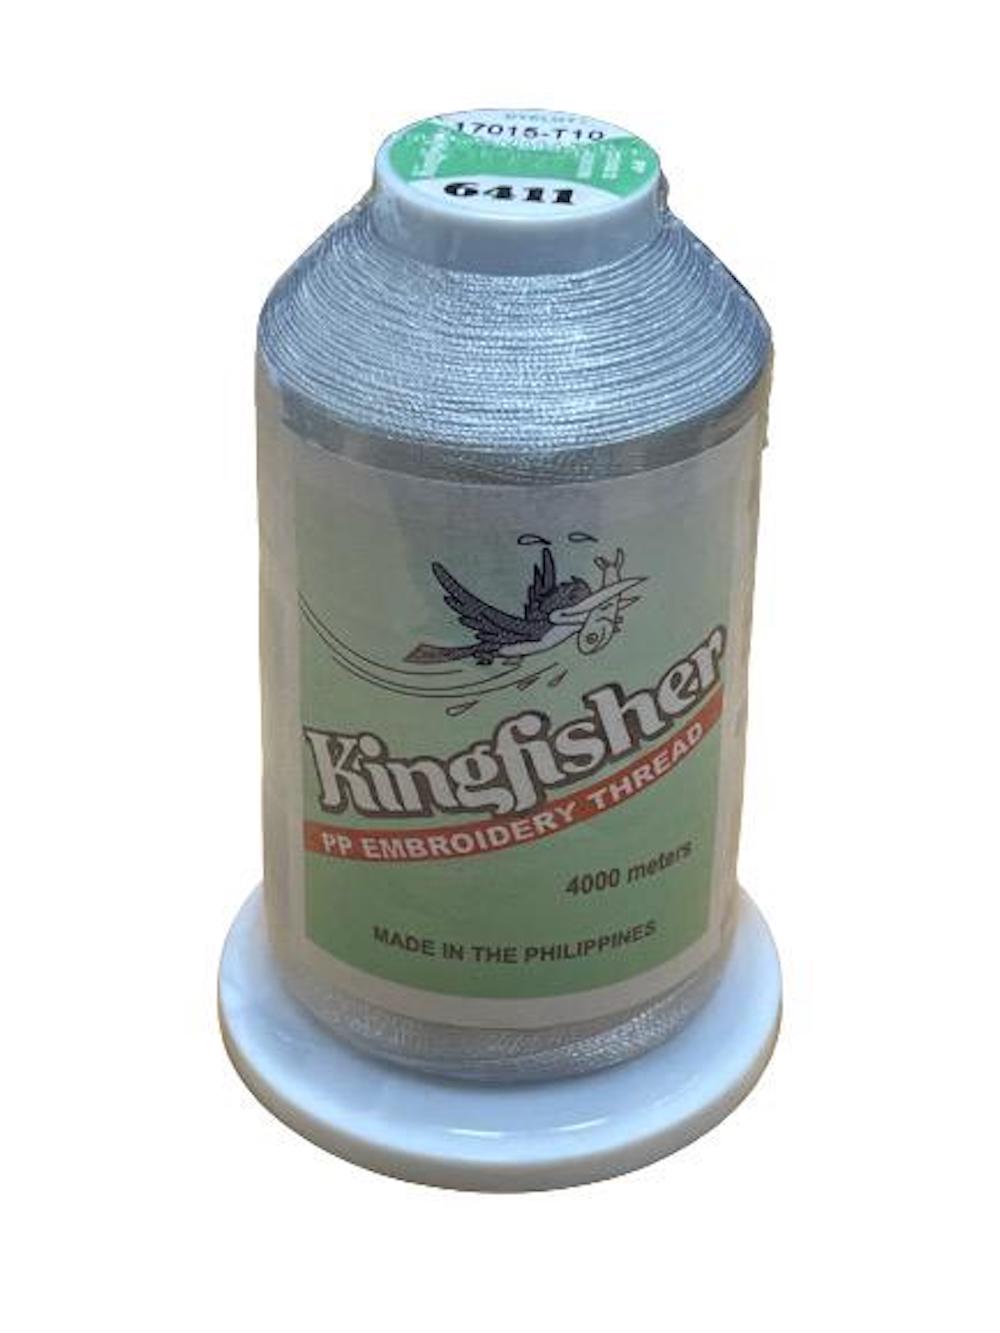 King Fisher Embroidery Thread 4000m 6411 - MY SEWING MALL